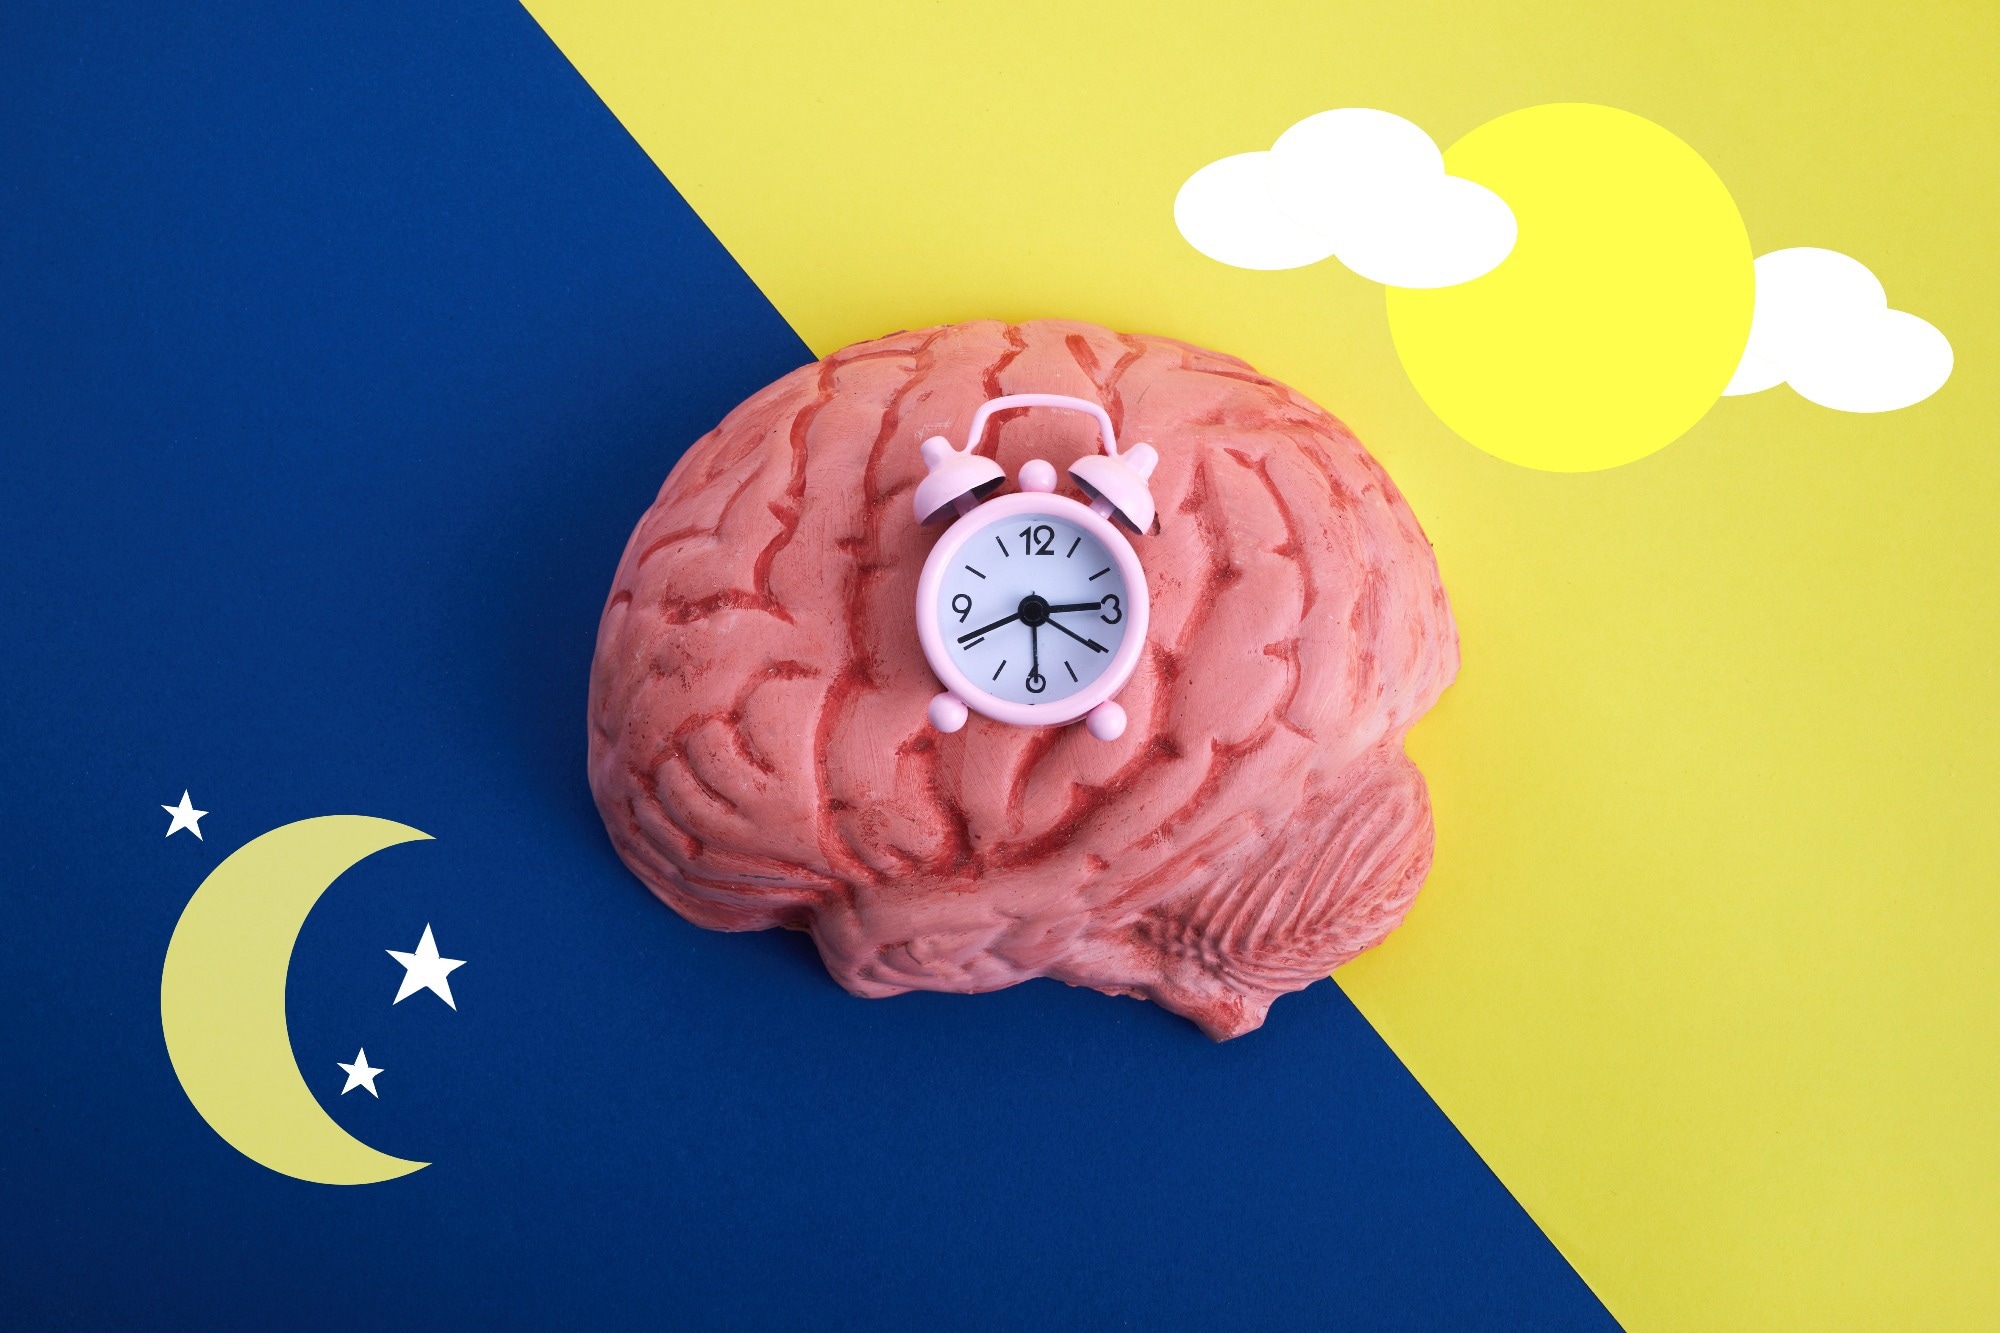 Study: Multidimensional Sleep Health Prior to SARS-CoV-2 Infection and Risk of Post–COVID-19 Condition. Image Credit: vetre/Shutterstock.com